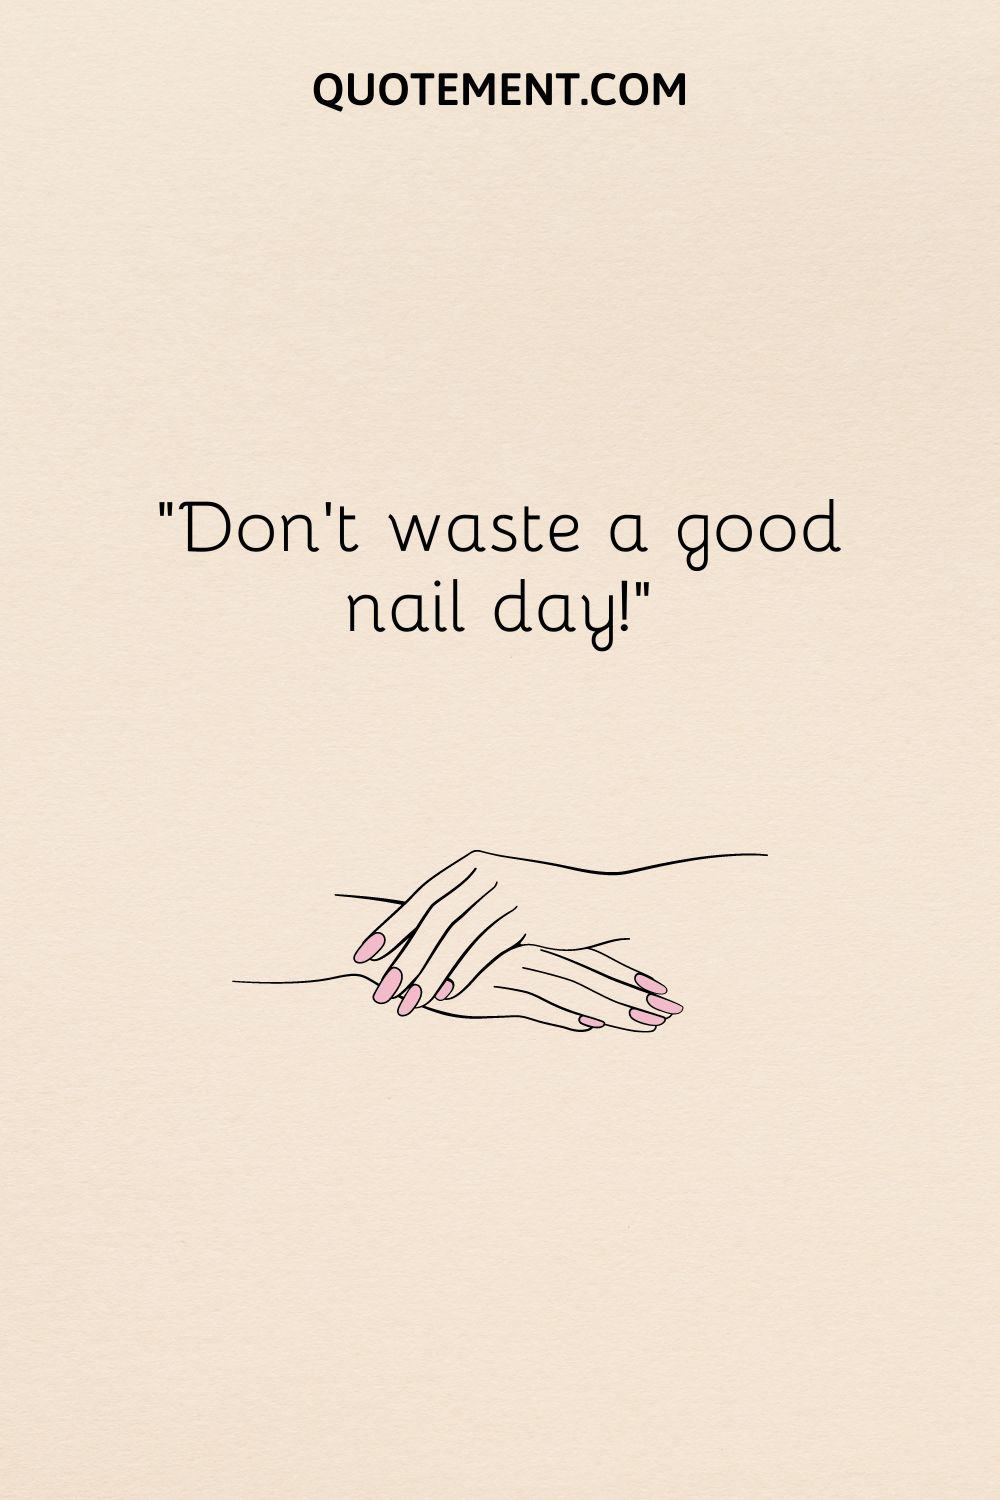 Don’t waste a good nail day